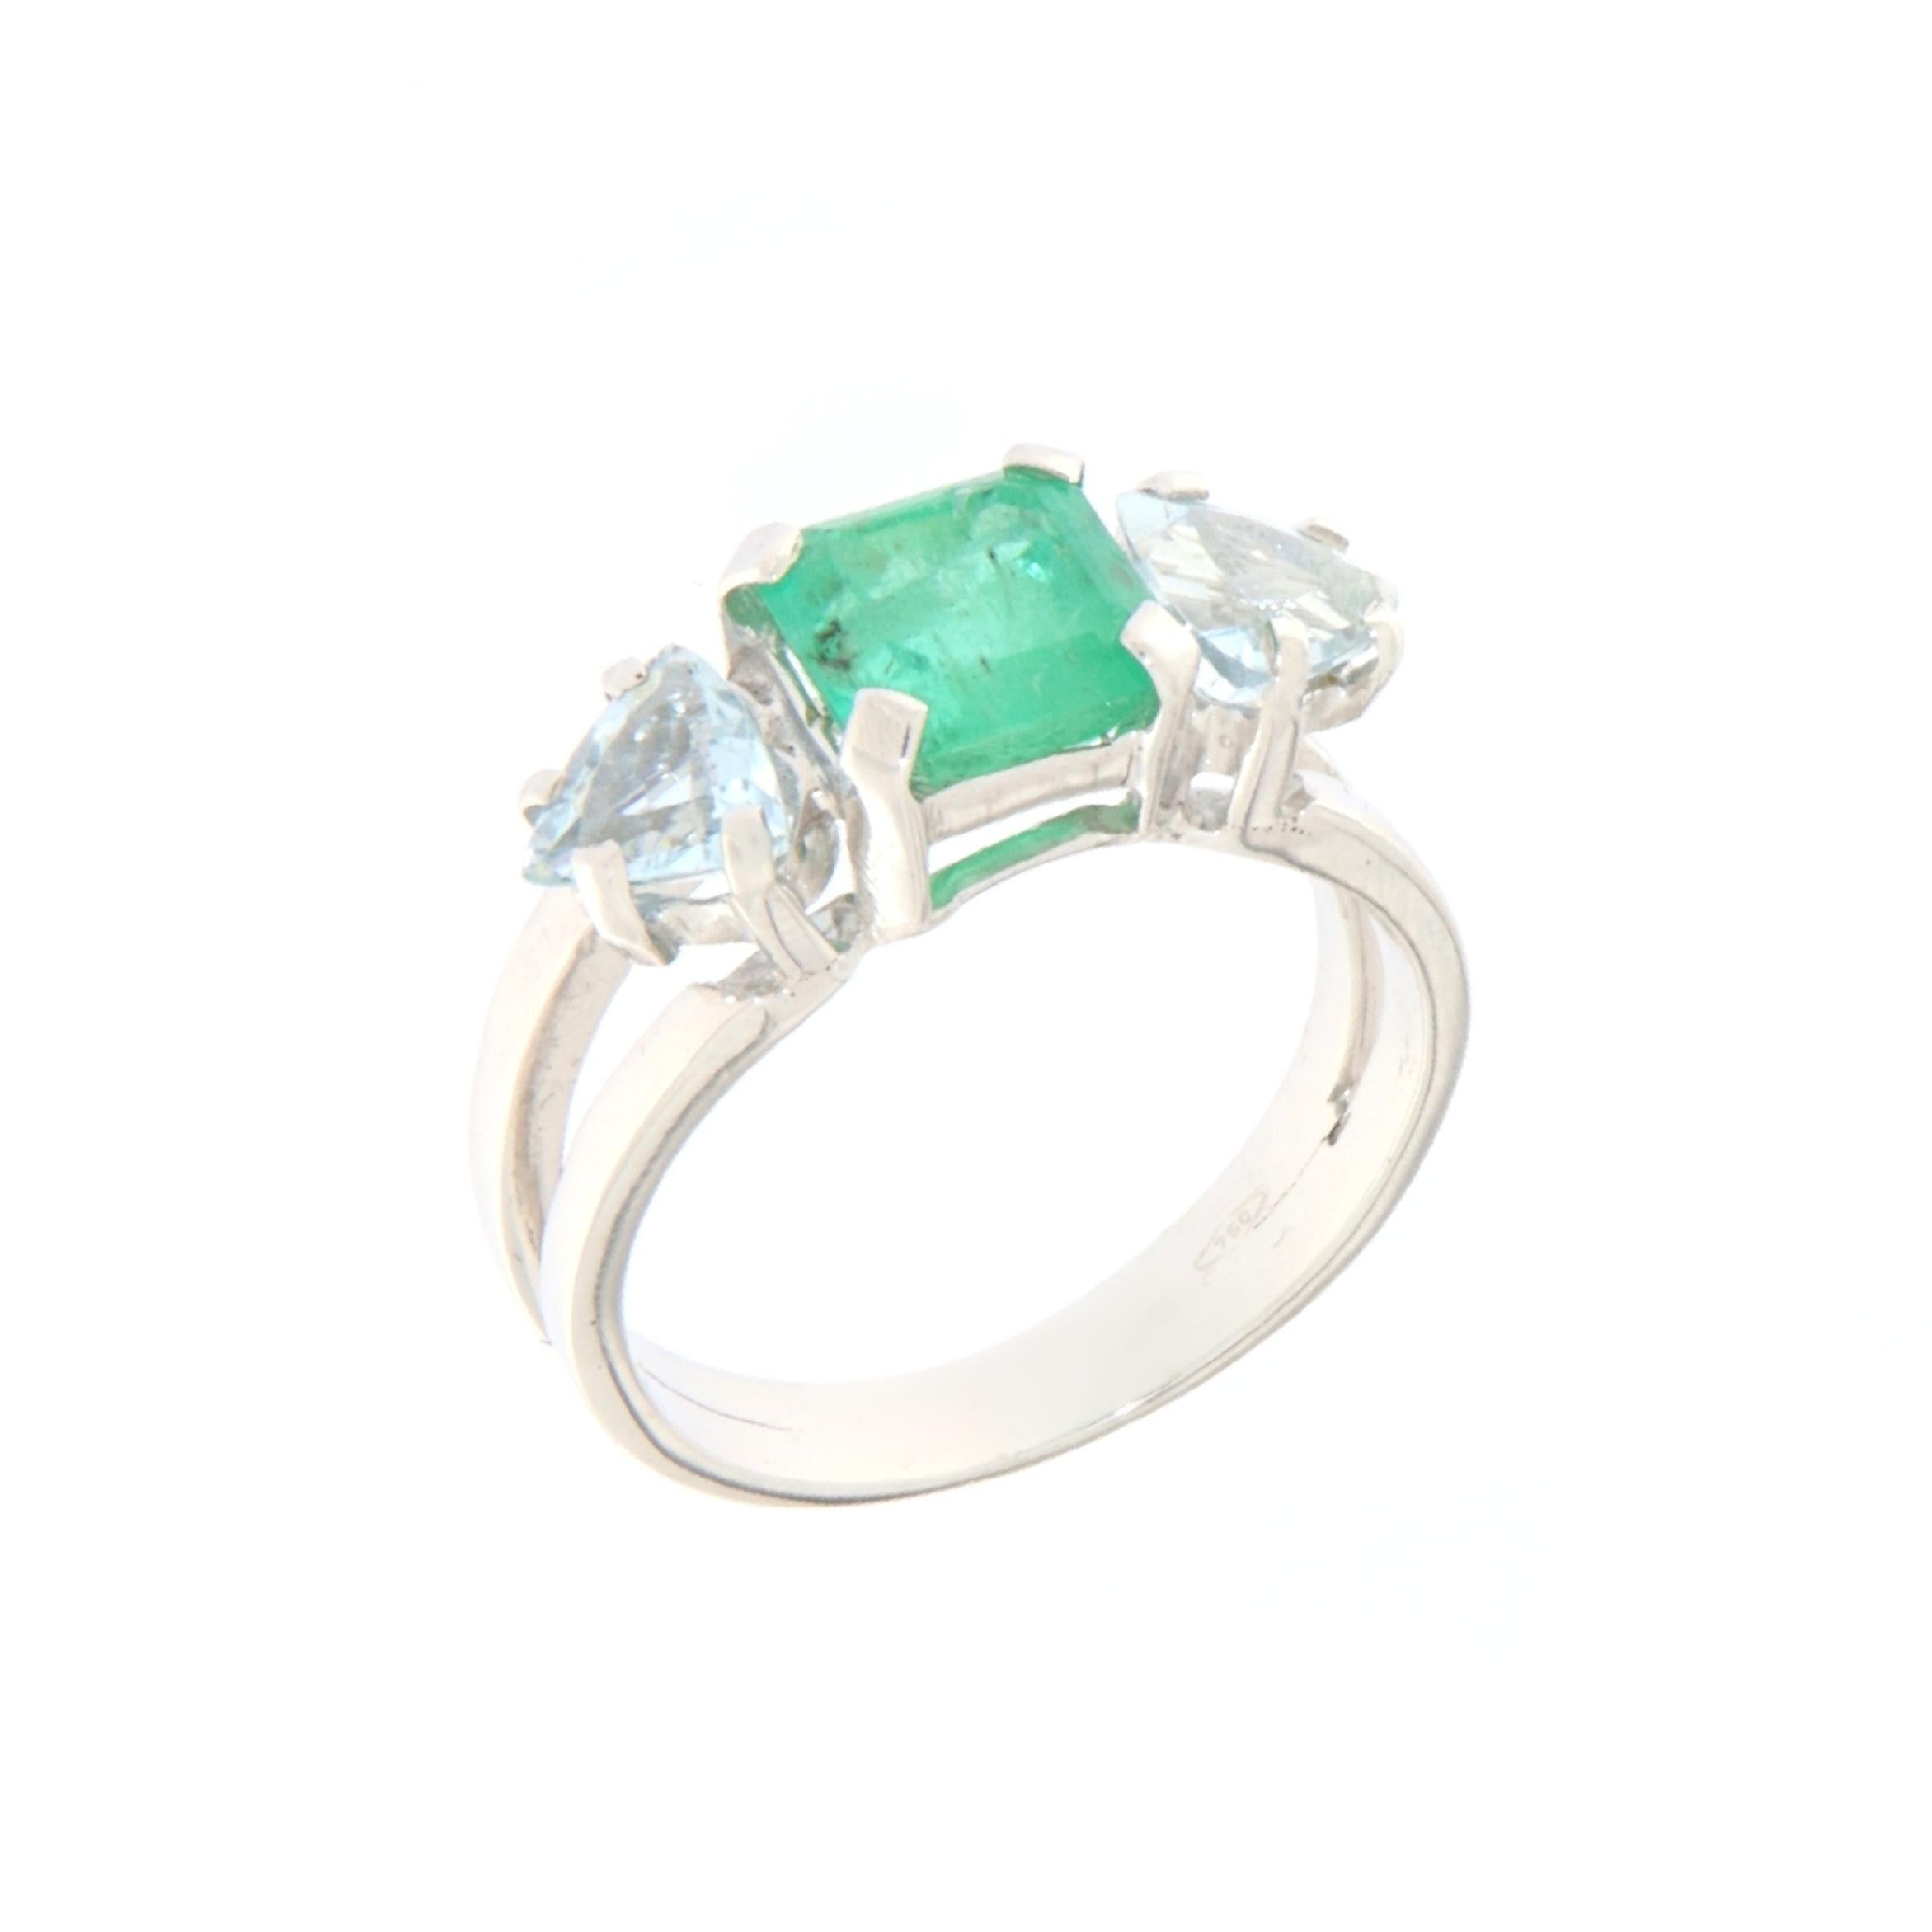 This elegant ring in 18-karat white gold is a triumph of color and light, perfectly balanced between the vibrancy of the central emerald and the serenity of the side aquamarines. At the center, an emerald of intense green, symbolizing renewal and